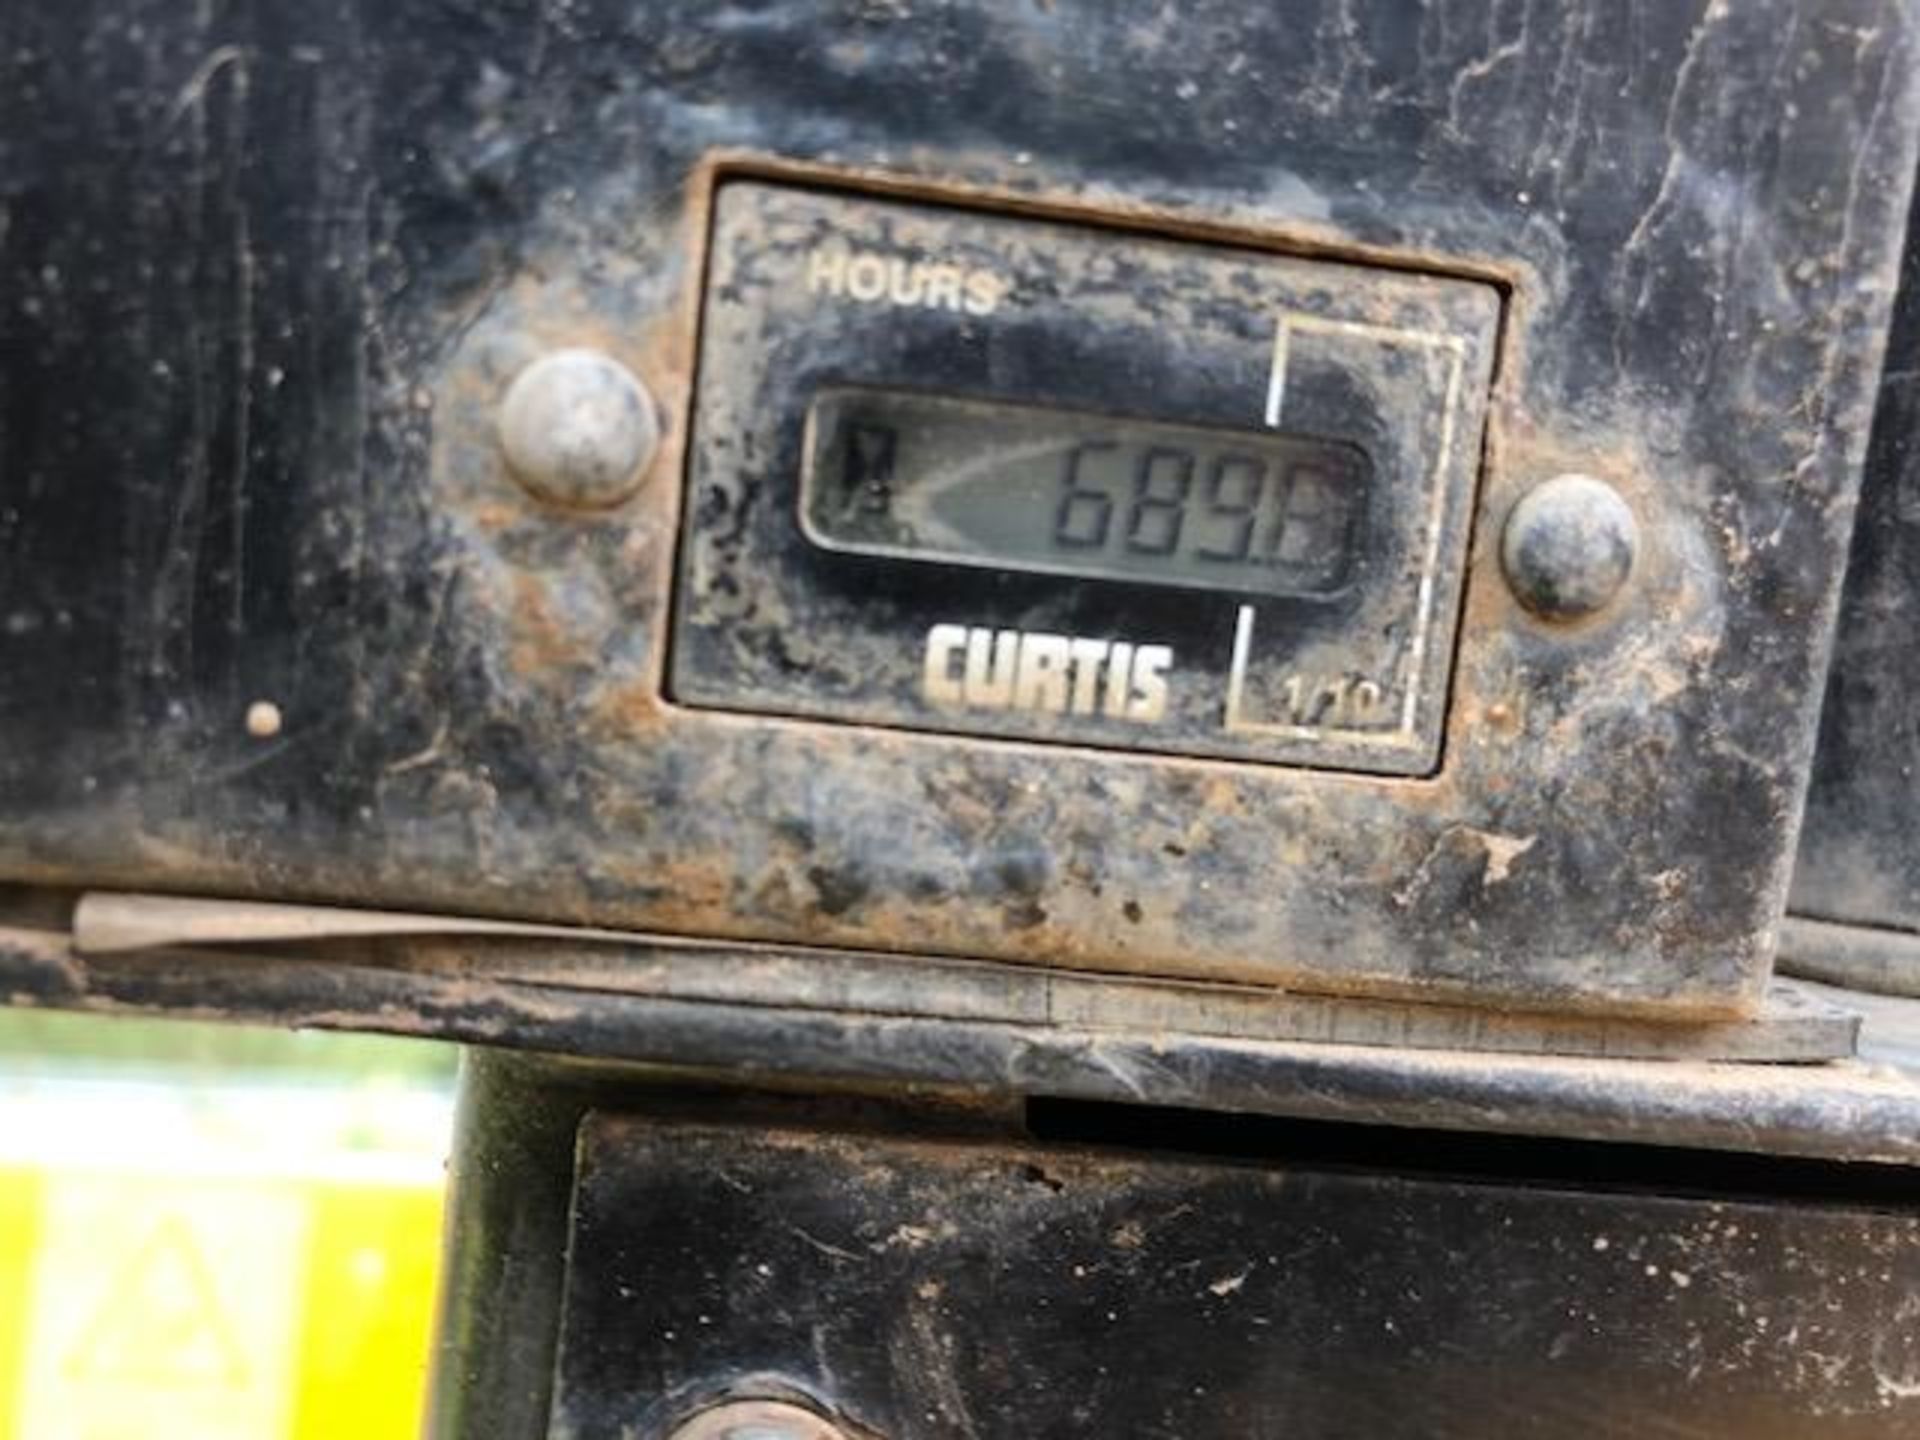 2015 JCB 1THT DUMPER SN: SLBDPPKJEFFRA2567, RECORDED HOURS: 689 WHEN TESTED WAS SEEN TO DRIVE, - Image 6 of 6